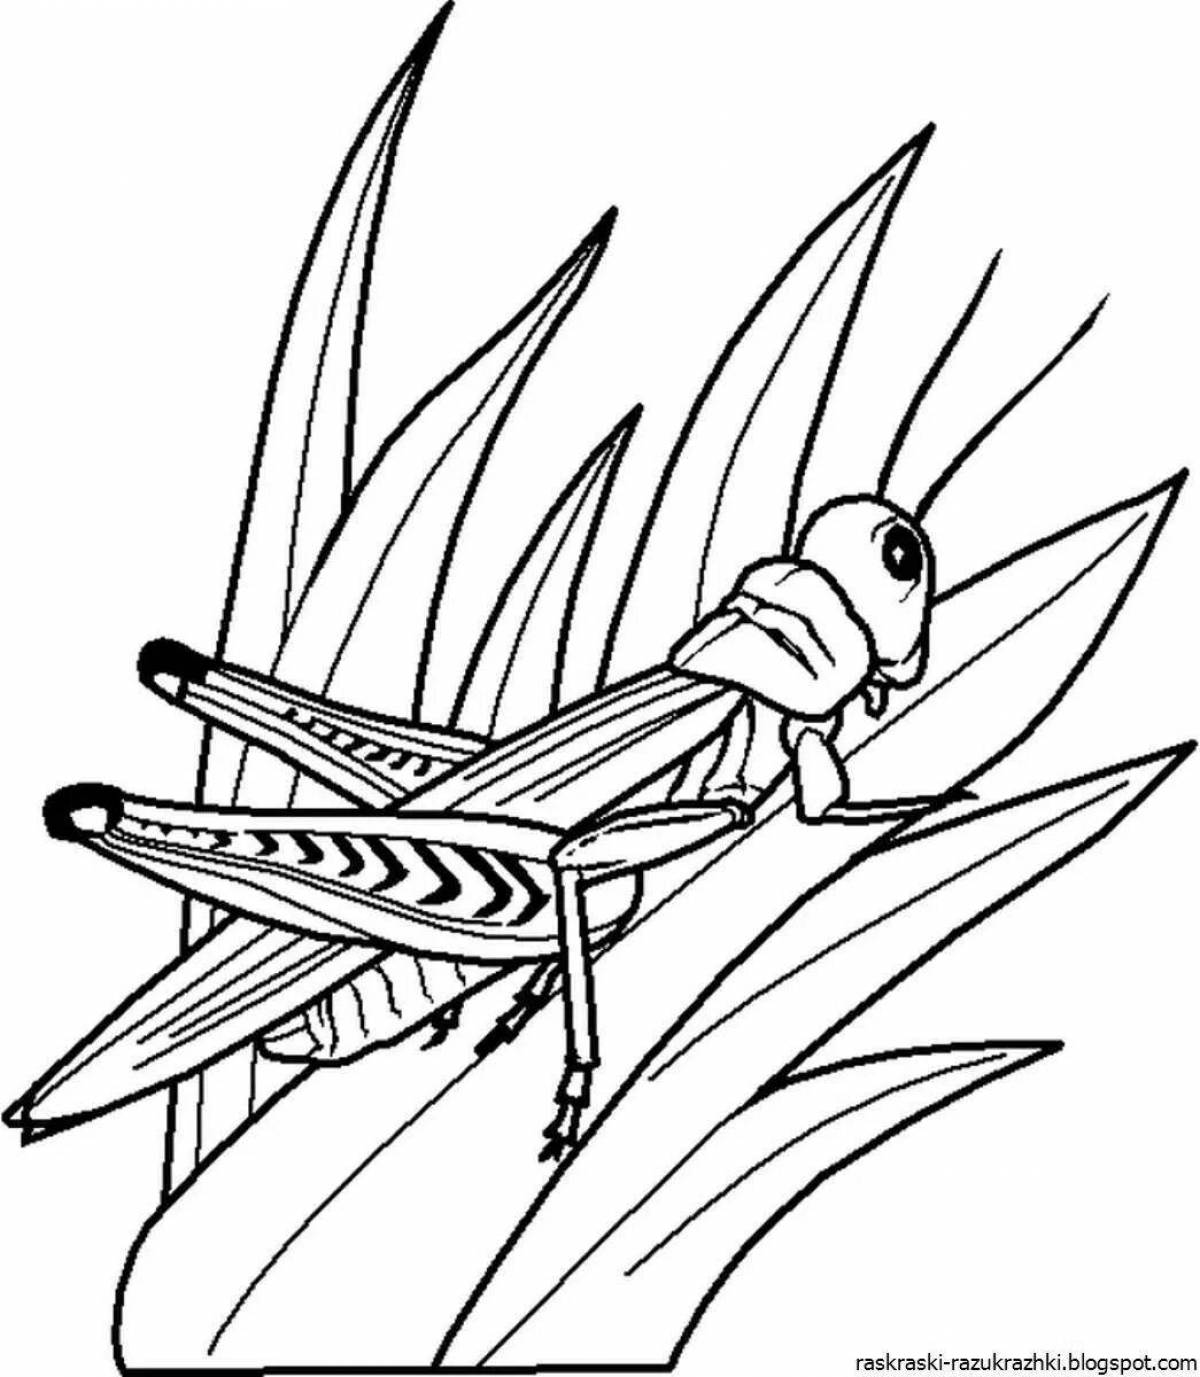 Creative insect coloring book for 6-7 year olds